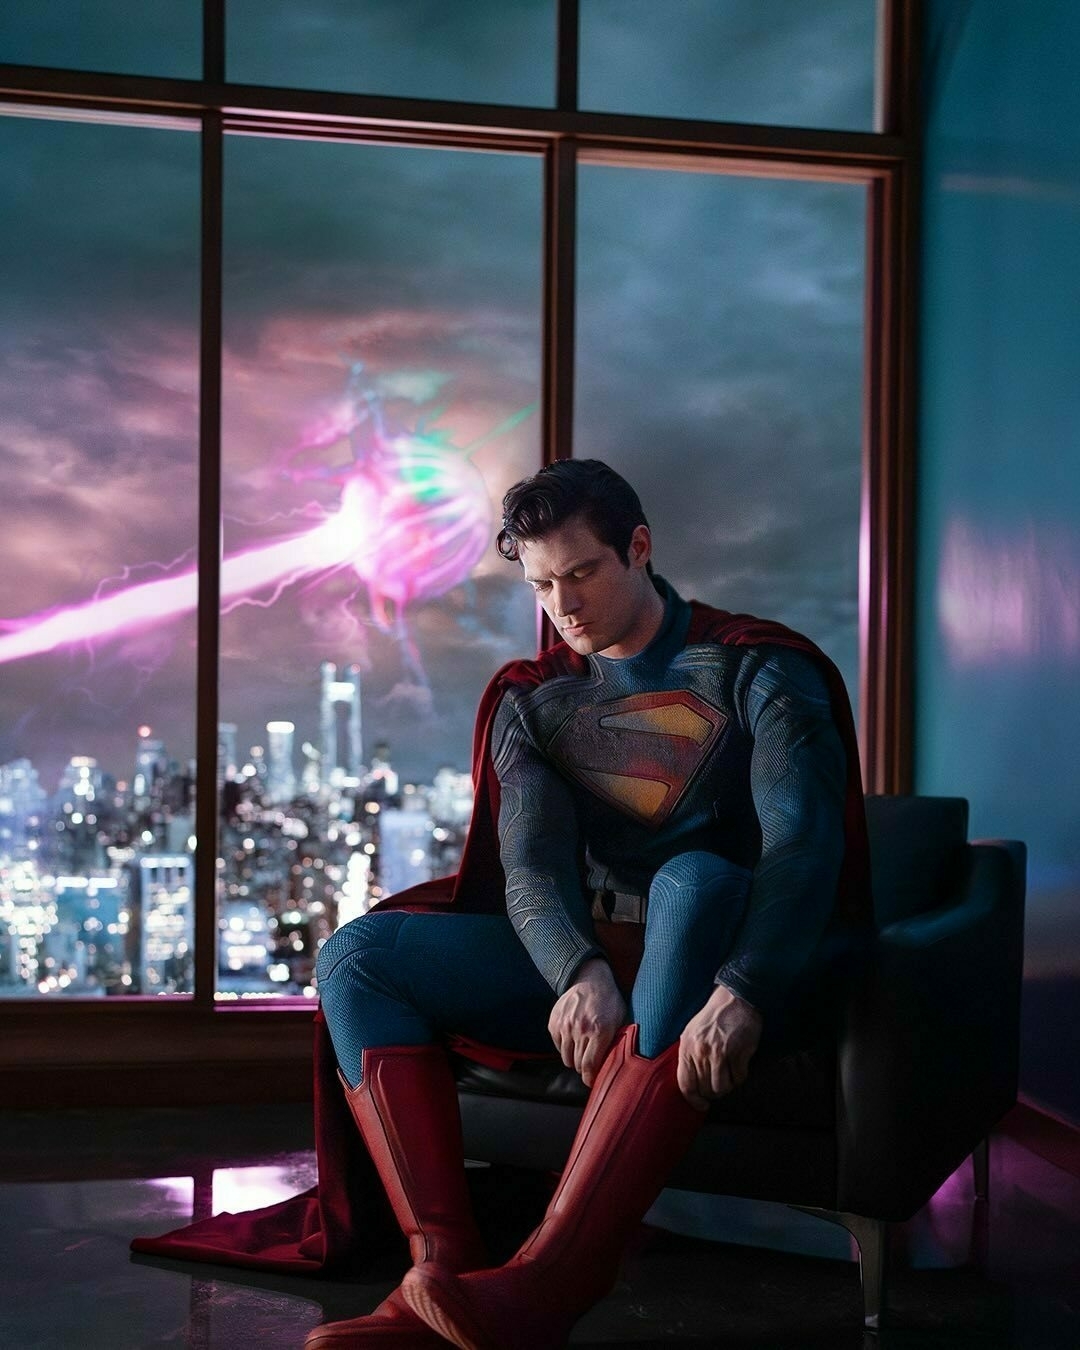 The first look at James Gunn's Superman, as we see David Corenswet, in costume, sitting in a chair, pulling on his boots, as some sort of laser explosion occurrs in the window behind him.